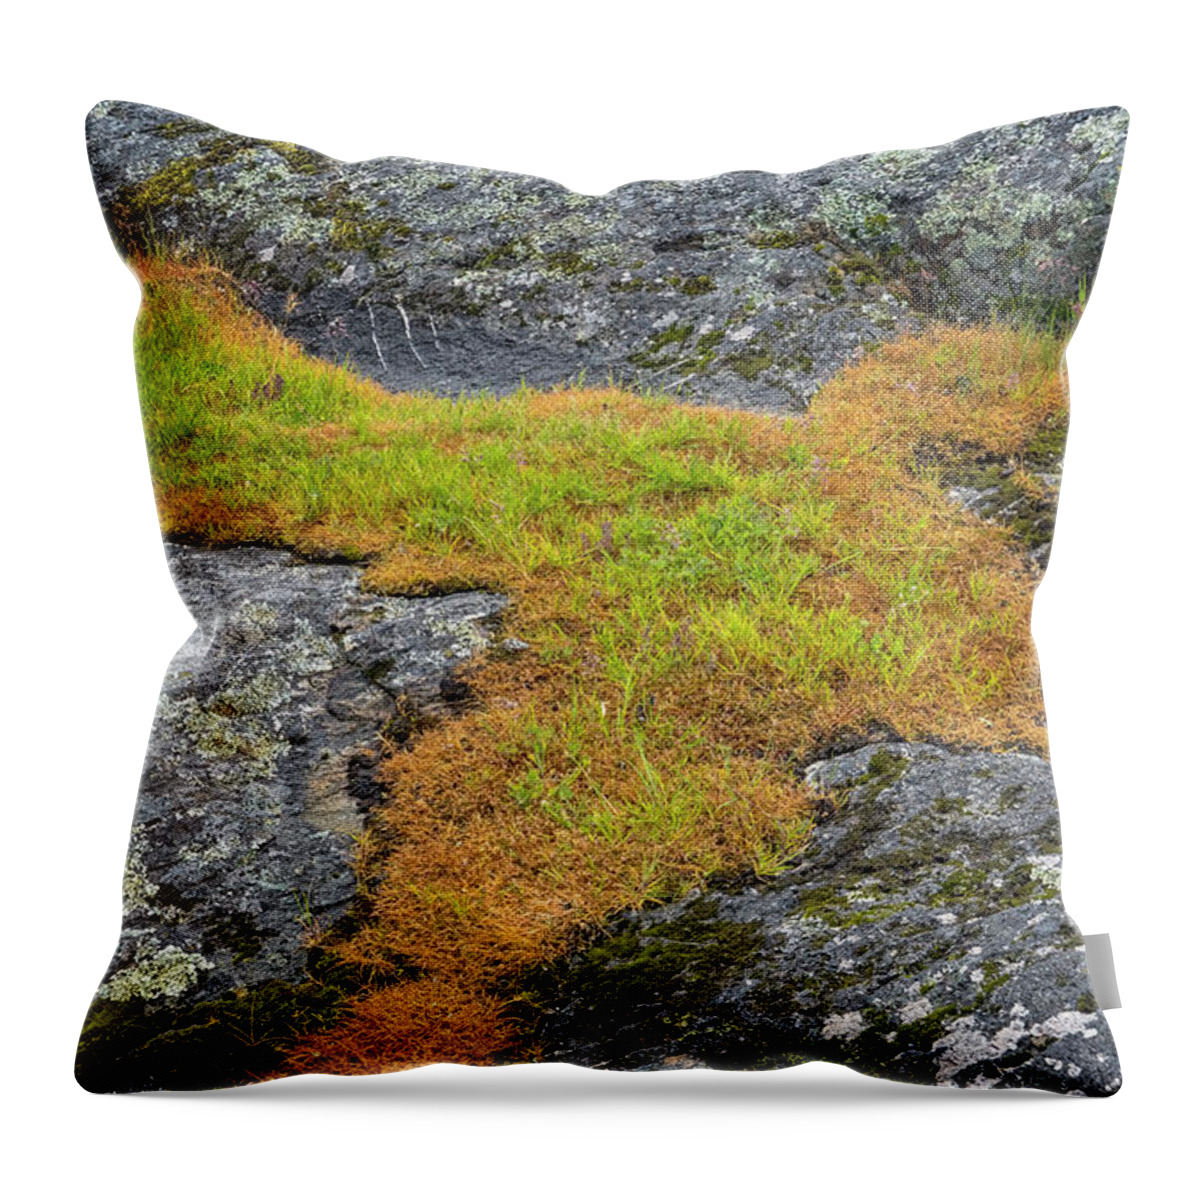 Oregon Coast Throw Pillow featuring the photograph Rock And Grass by Tom Singleton